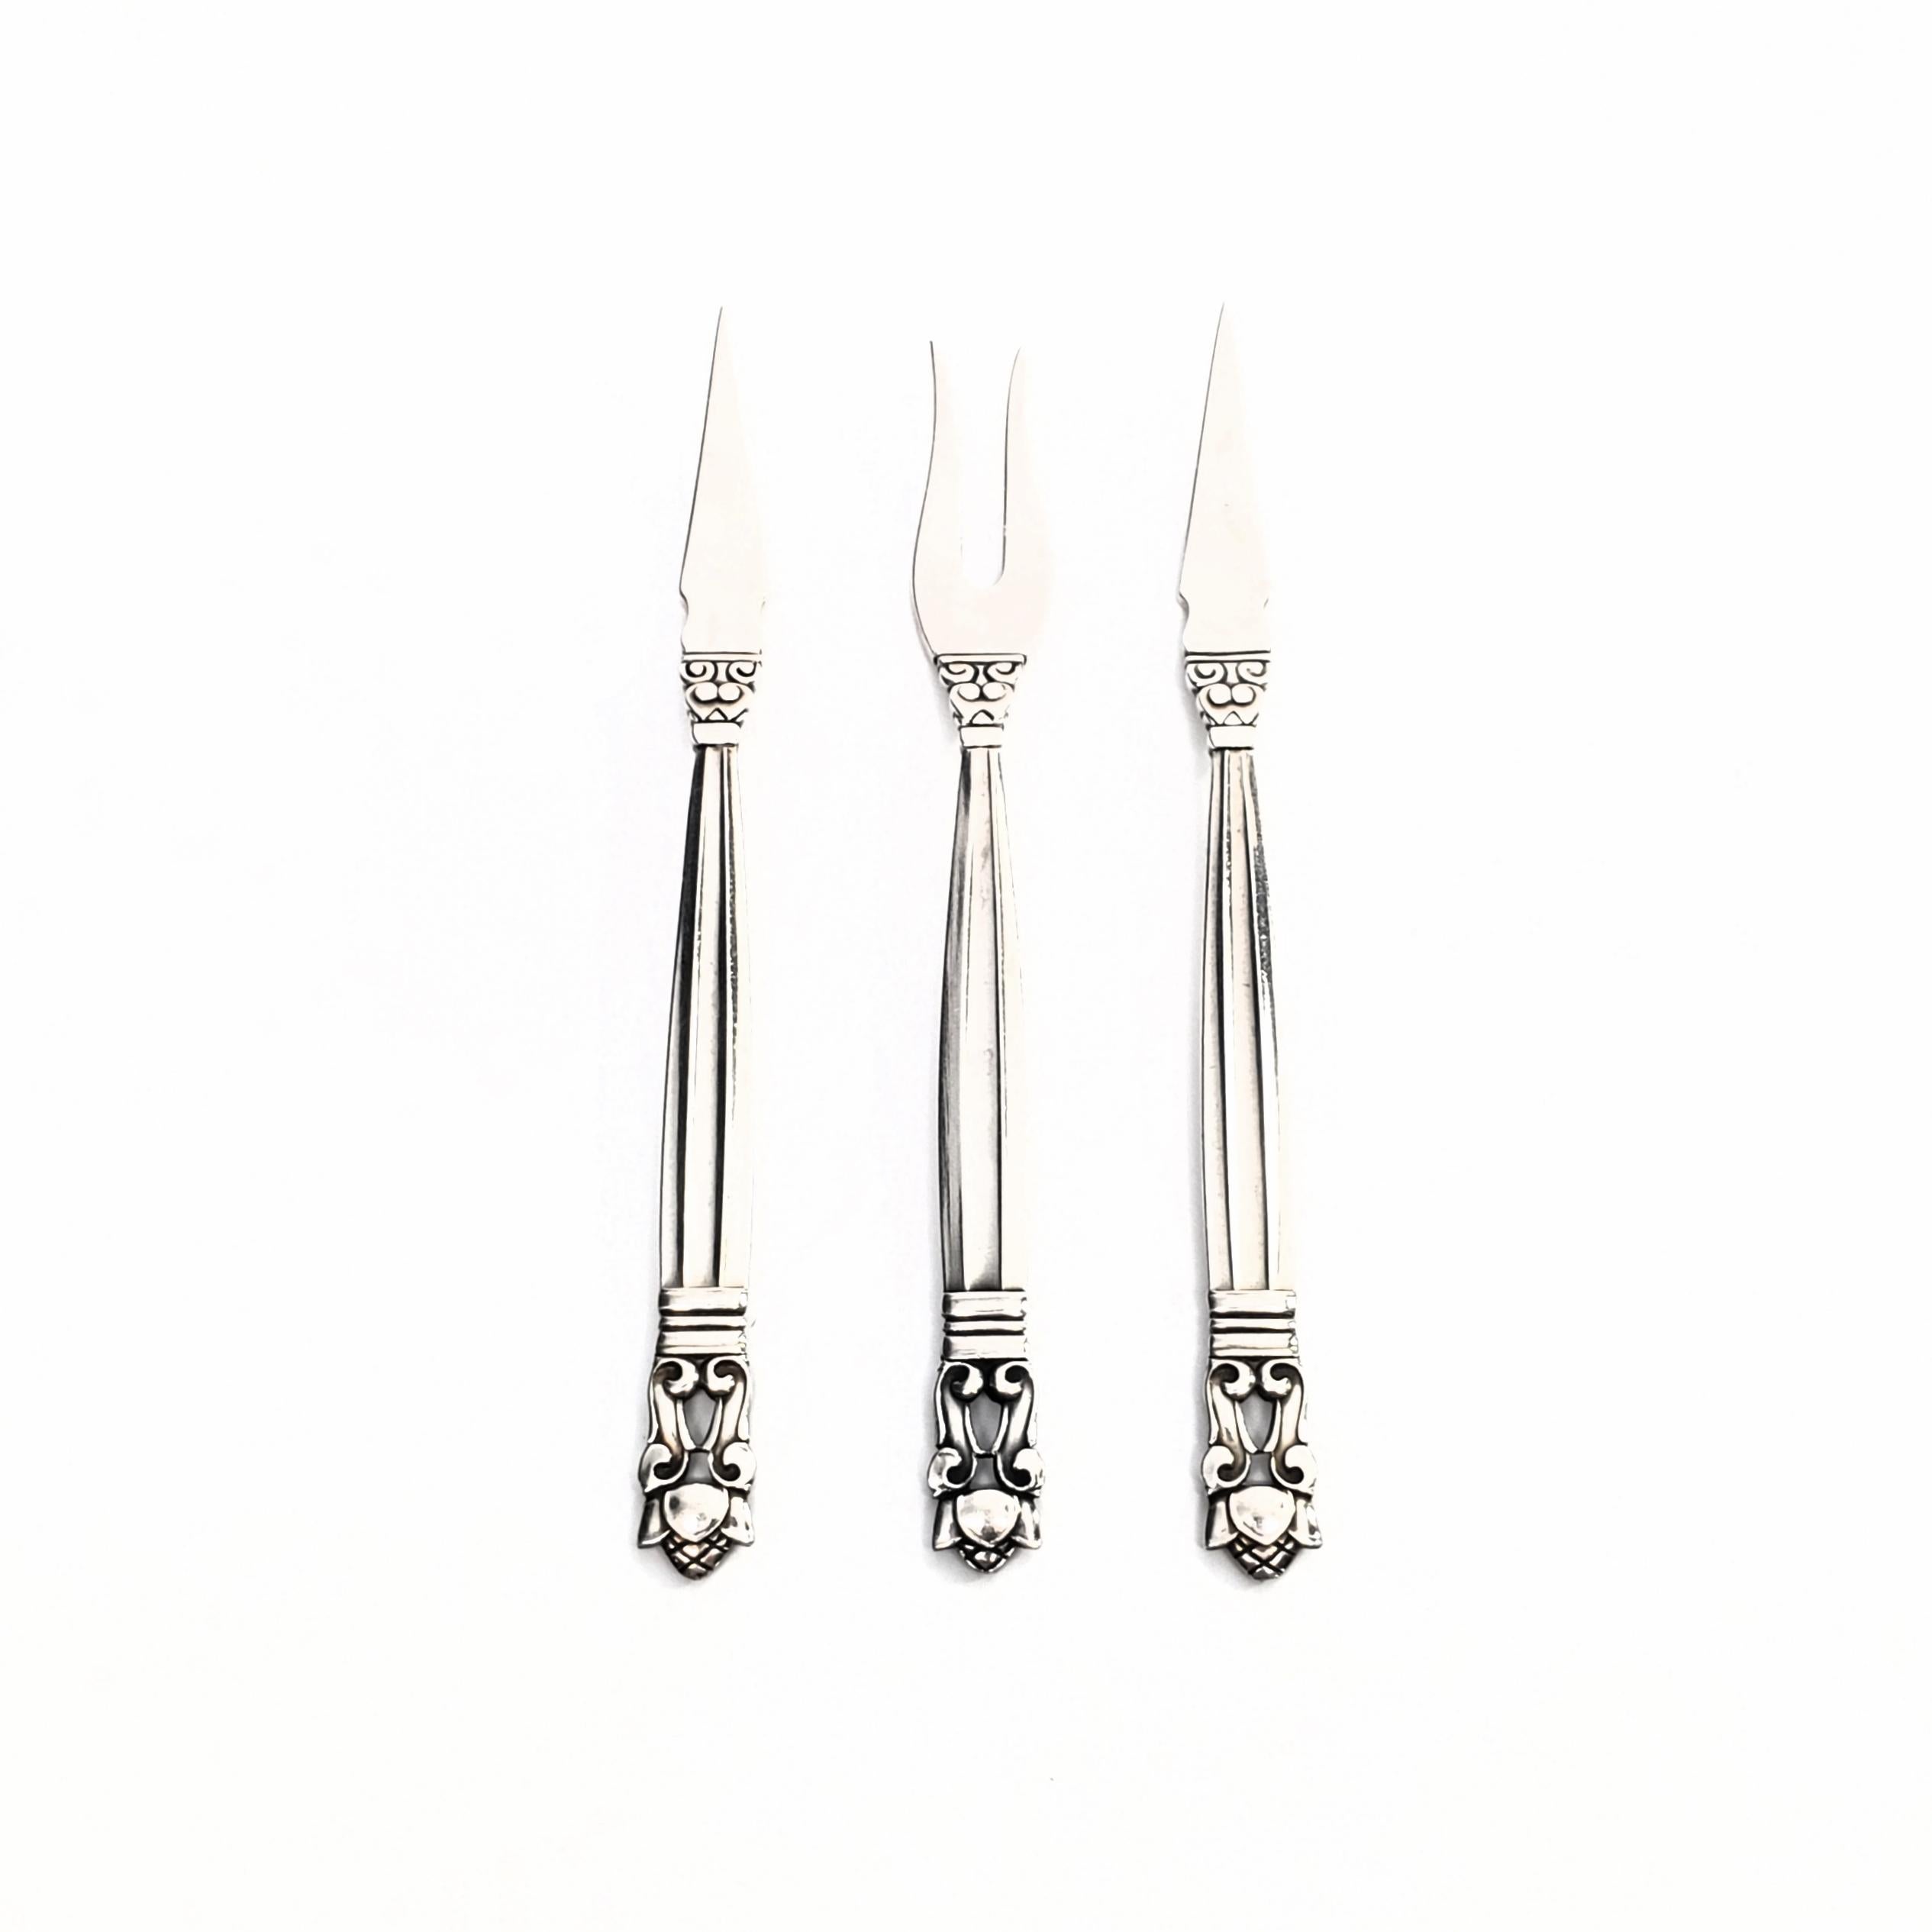 2 sterling silver nut picks and 1 sterling silver lemon fork from Georg Jensen in the Acorn pattern, circa 1915-1919.

The Acorn pattern was introduced in 1915 as a collaboration between Georg Jensen and designer Johan Ronde. The Acorn pattern,